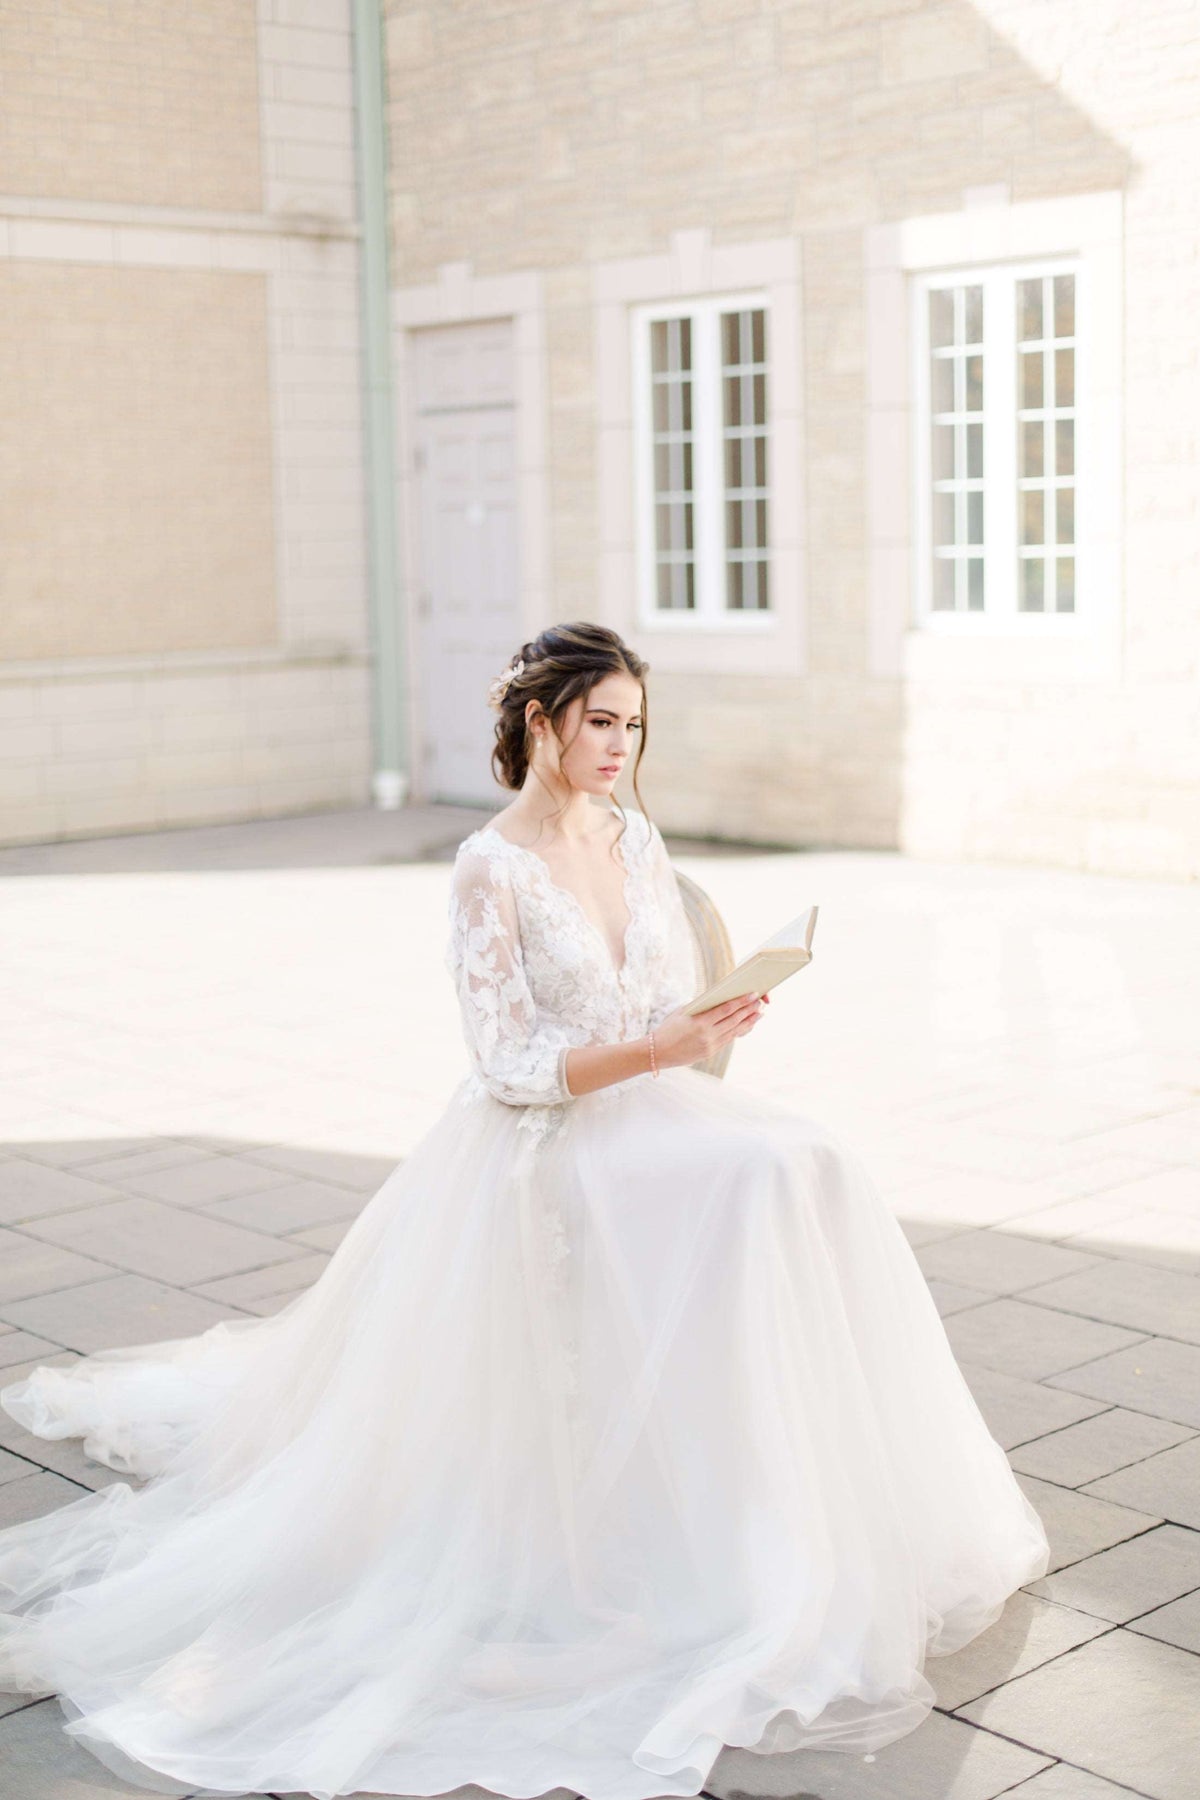 Most romantic champagne tulle wedding dress. Lace top and poet sleeves.Handmade by Catherine Langlois, Toronto, Canada